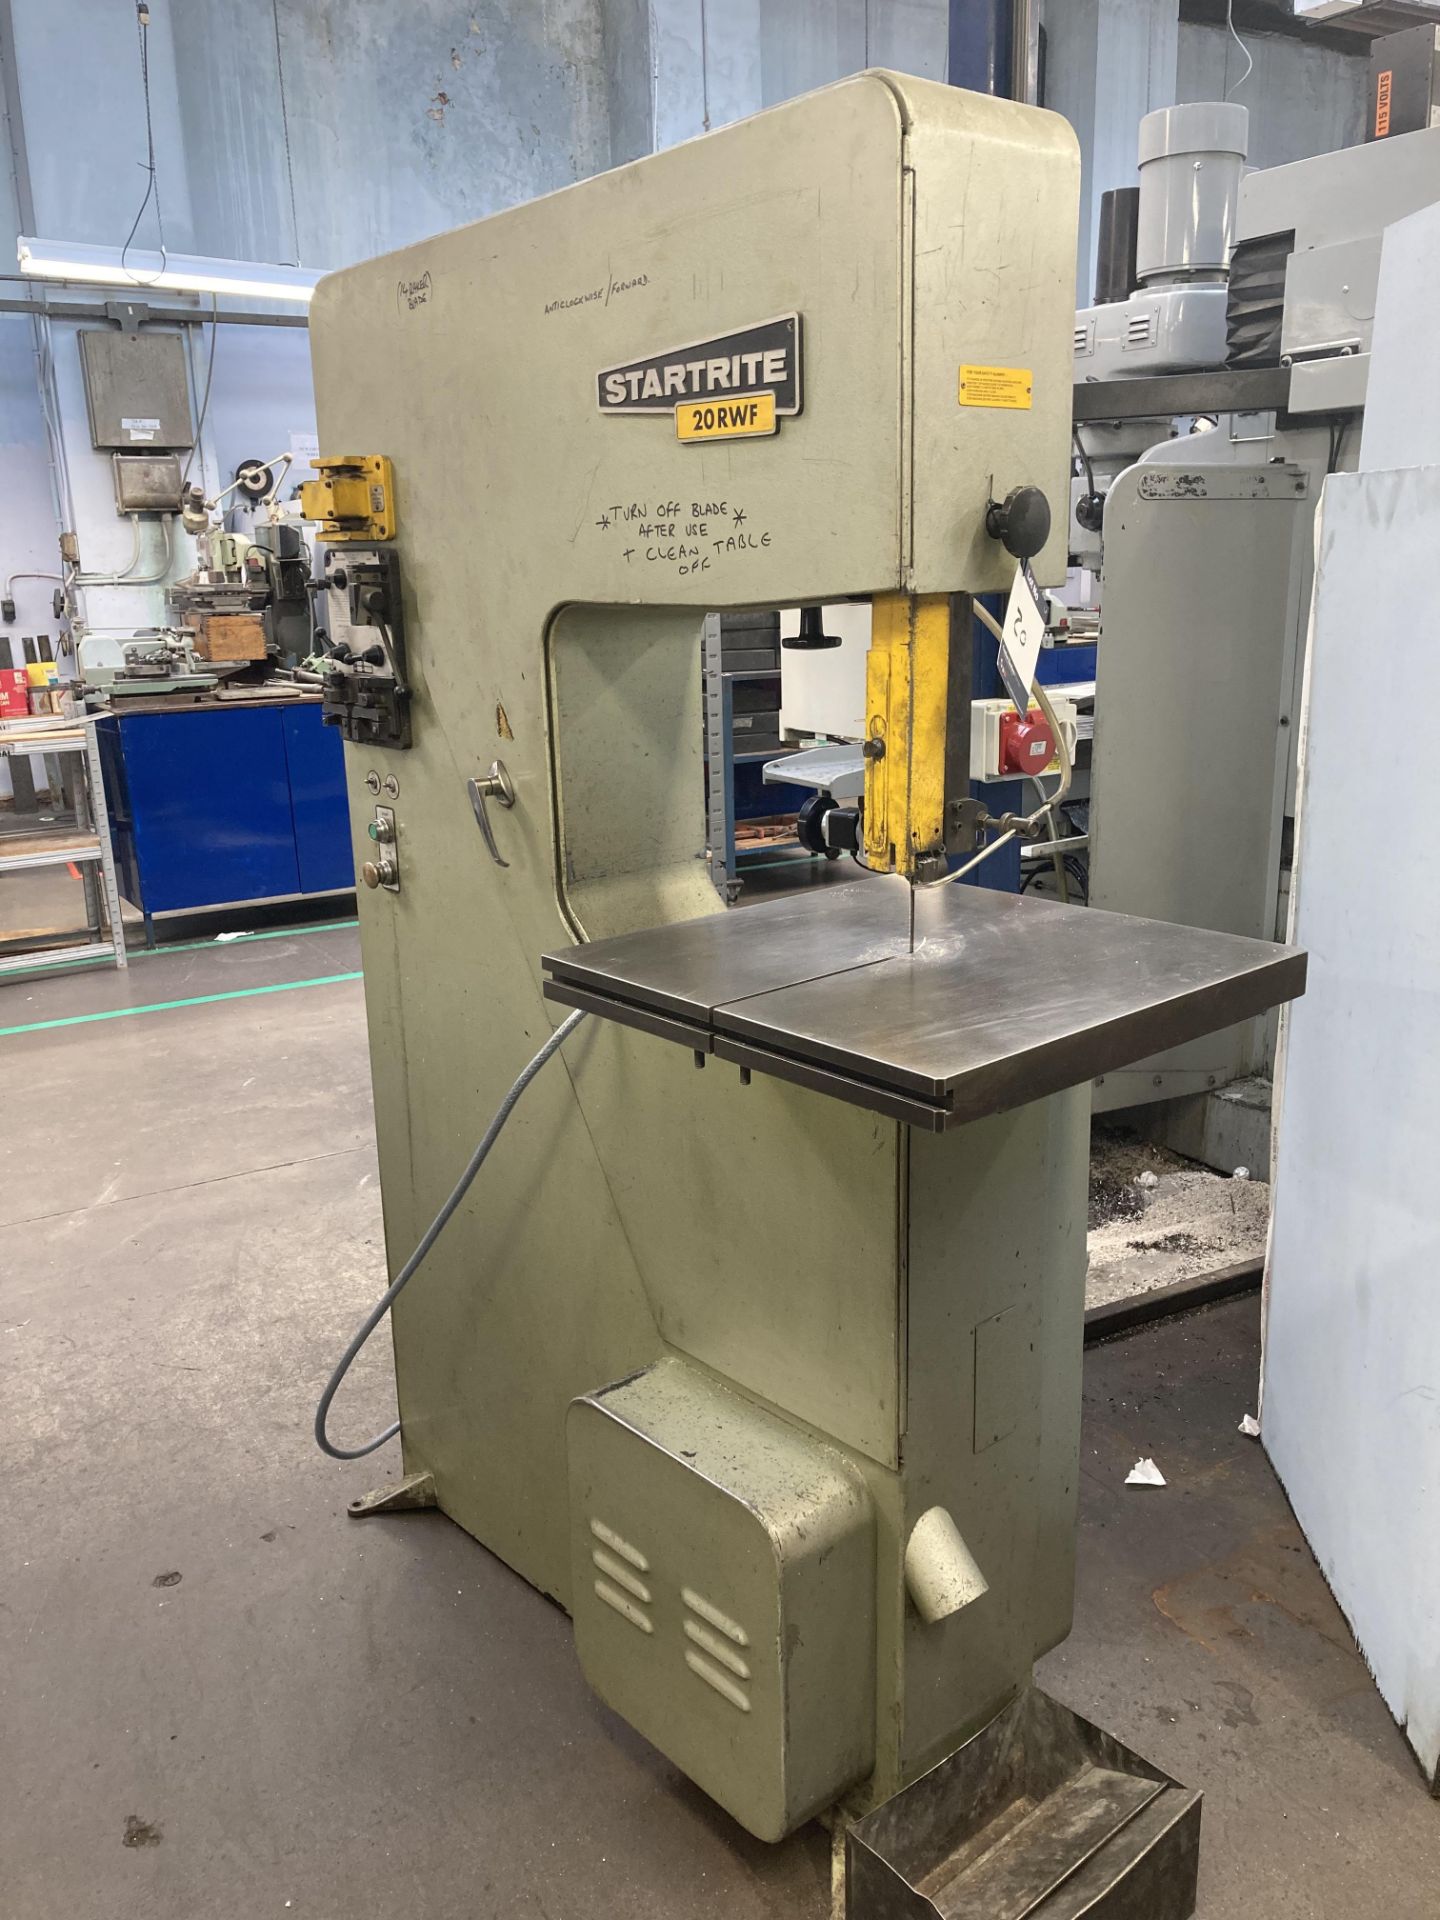 Startrite 20 RWF vertcial bandsaw, Serial No. 74520, 3 phase, 501mm throat with BS016 welding unit